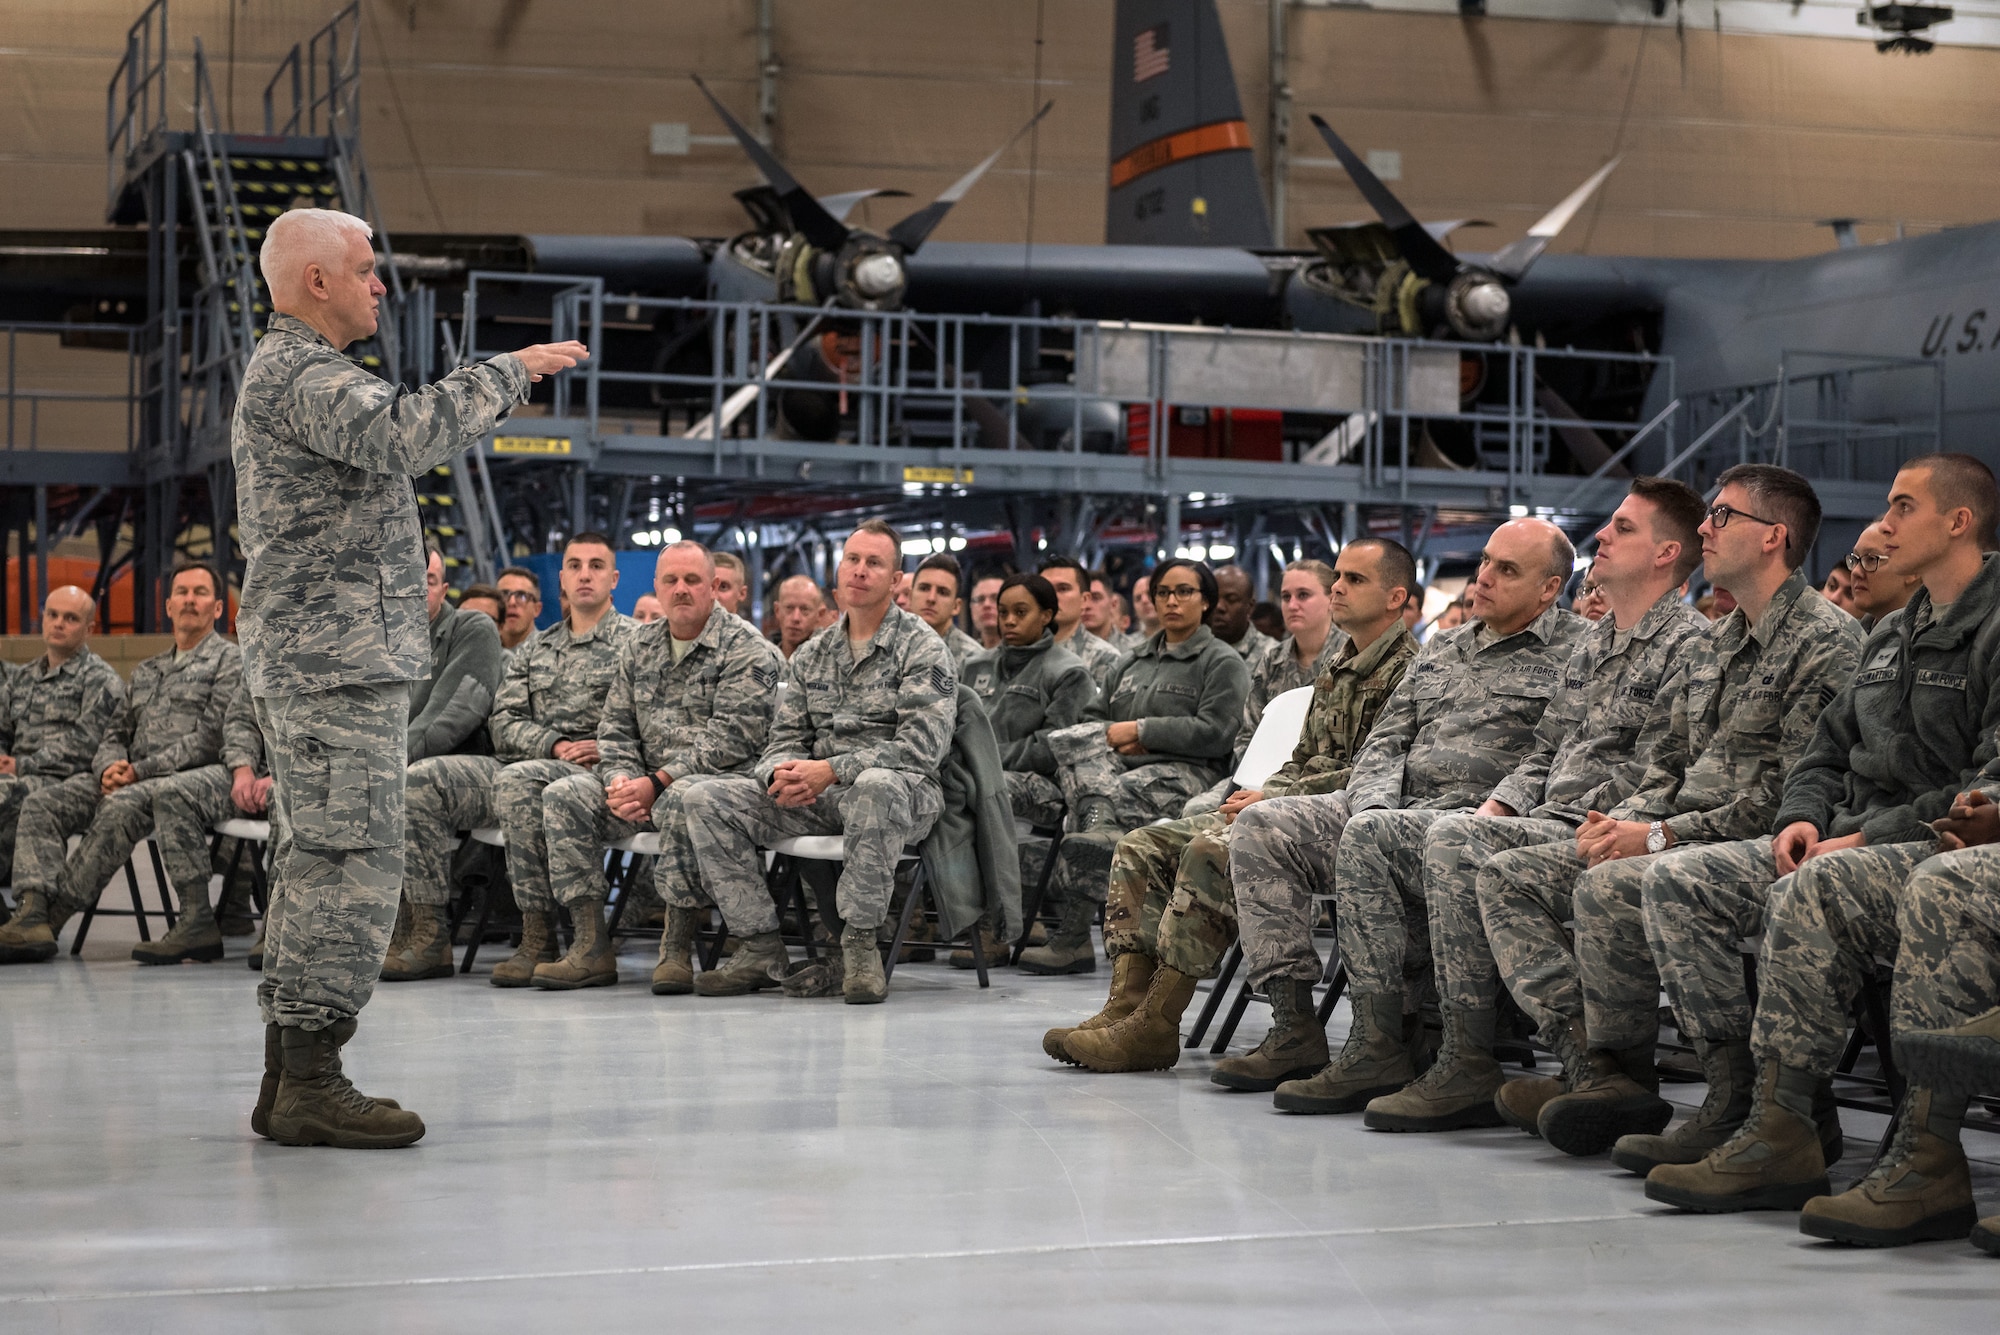 U.S. Air Force Lt. Gen. L. Scott Rice, the director of the Air National Guard, speaks with Airmen during a visit to the 182nd Airlift Wing in Peoria, Ill., Oct. 14, 2018.